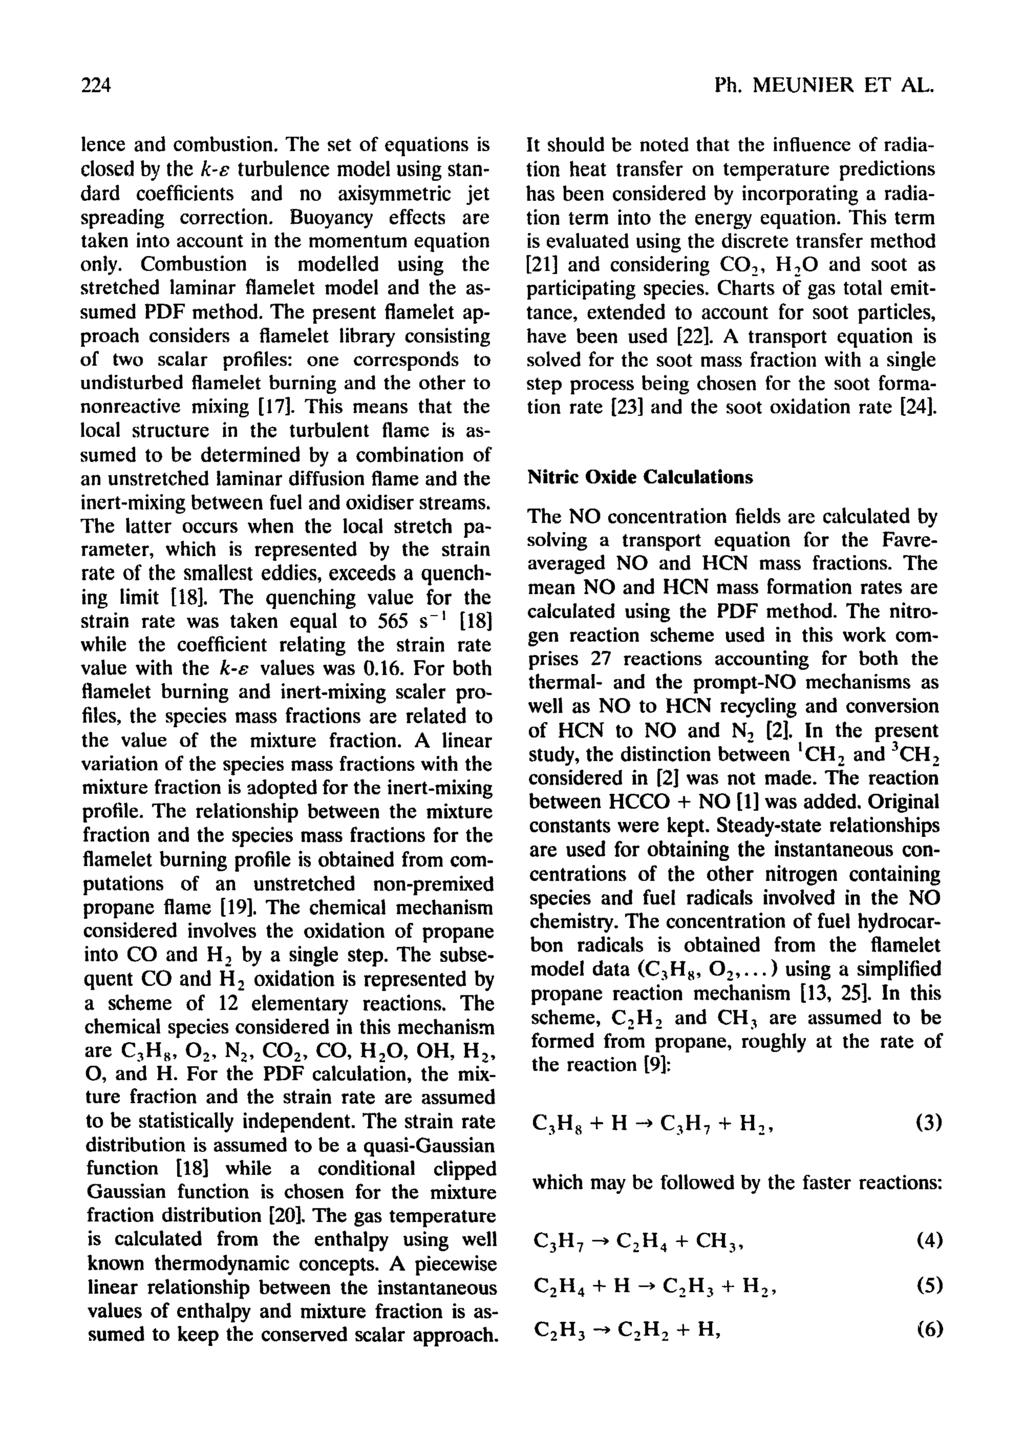 224 Ph. MEUNIER ET AL. lence and combustion. The set of equations is closed by the k-e turbulence model using standard coefficients and no axisymmetric jet spreading correction.